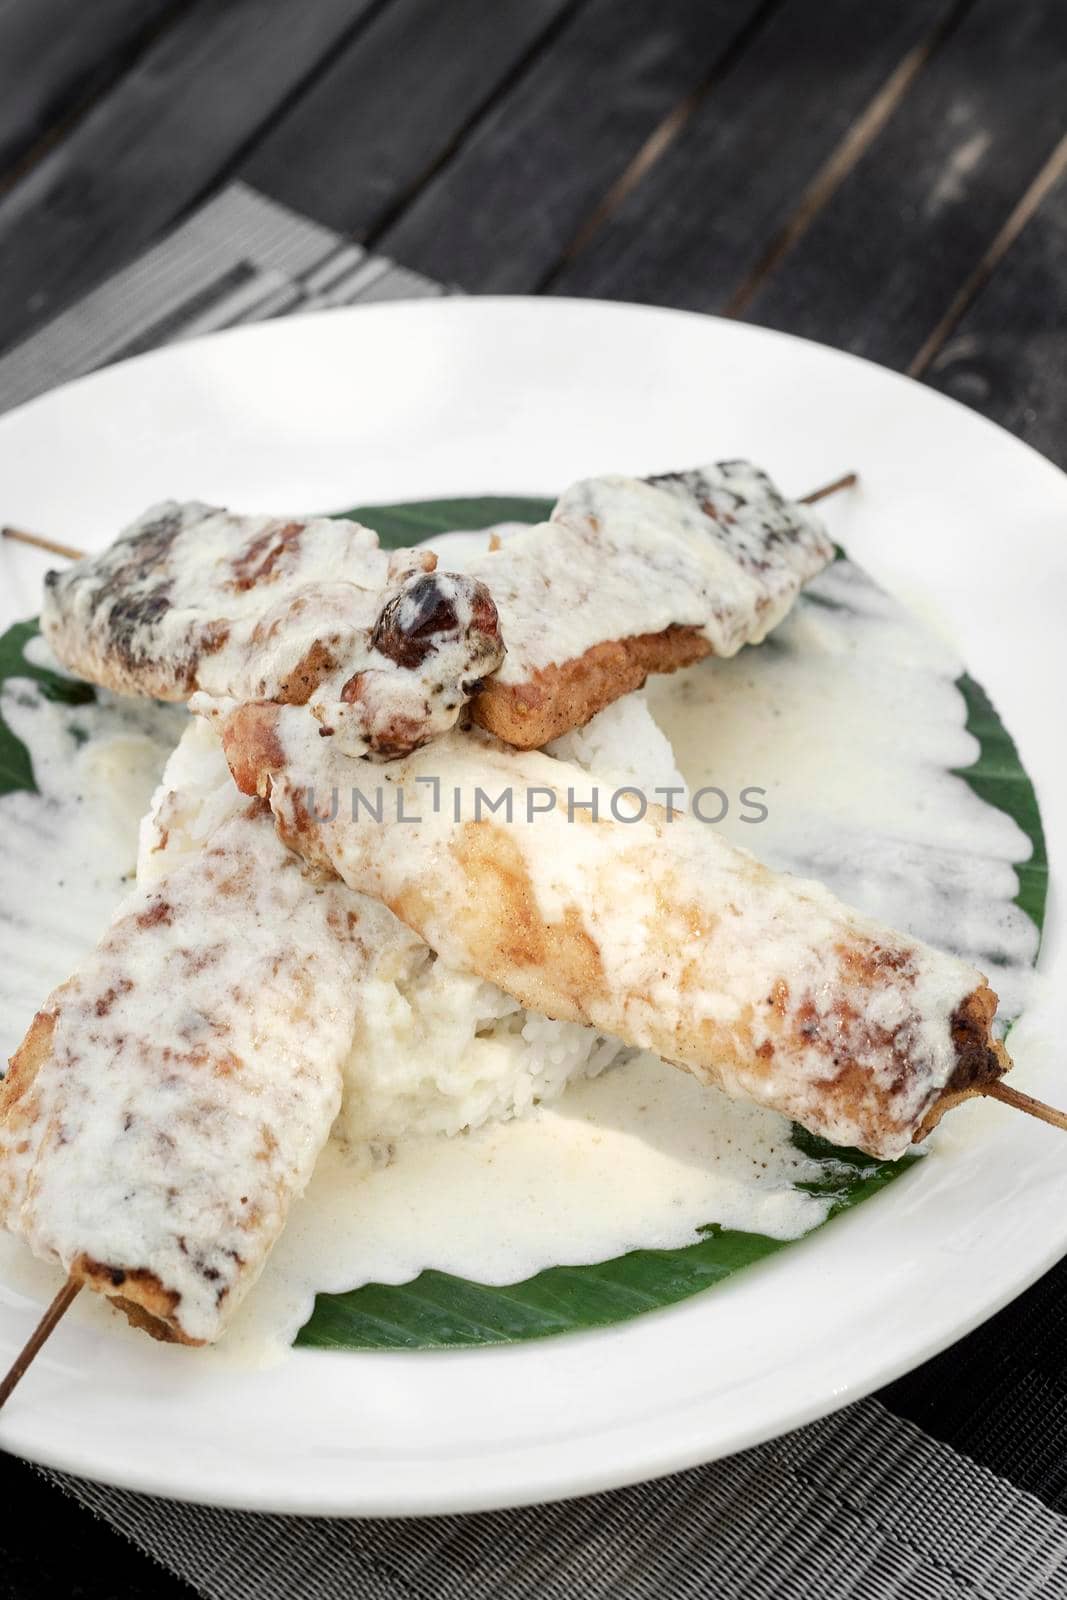 tropoical fish skewers with creamy coconut sauce and rice in vietnam restaurant